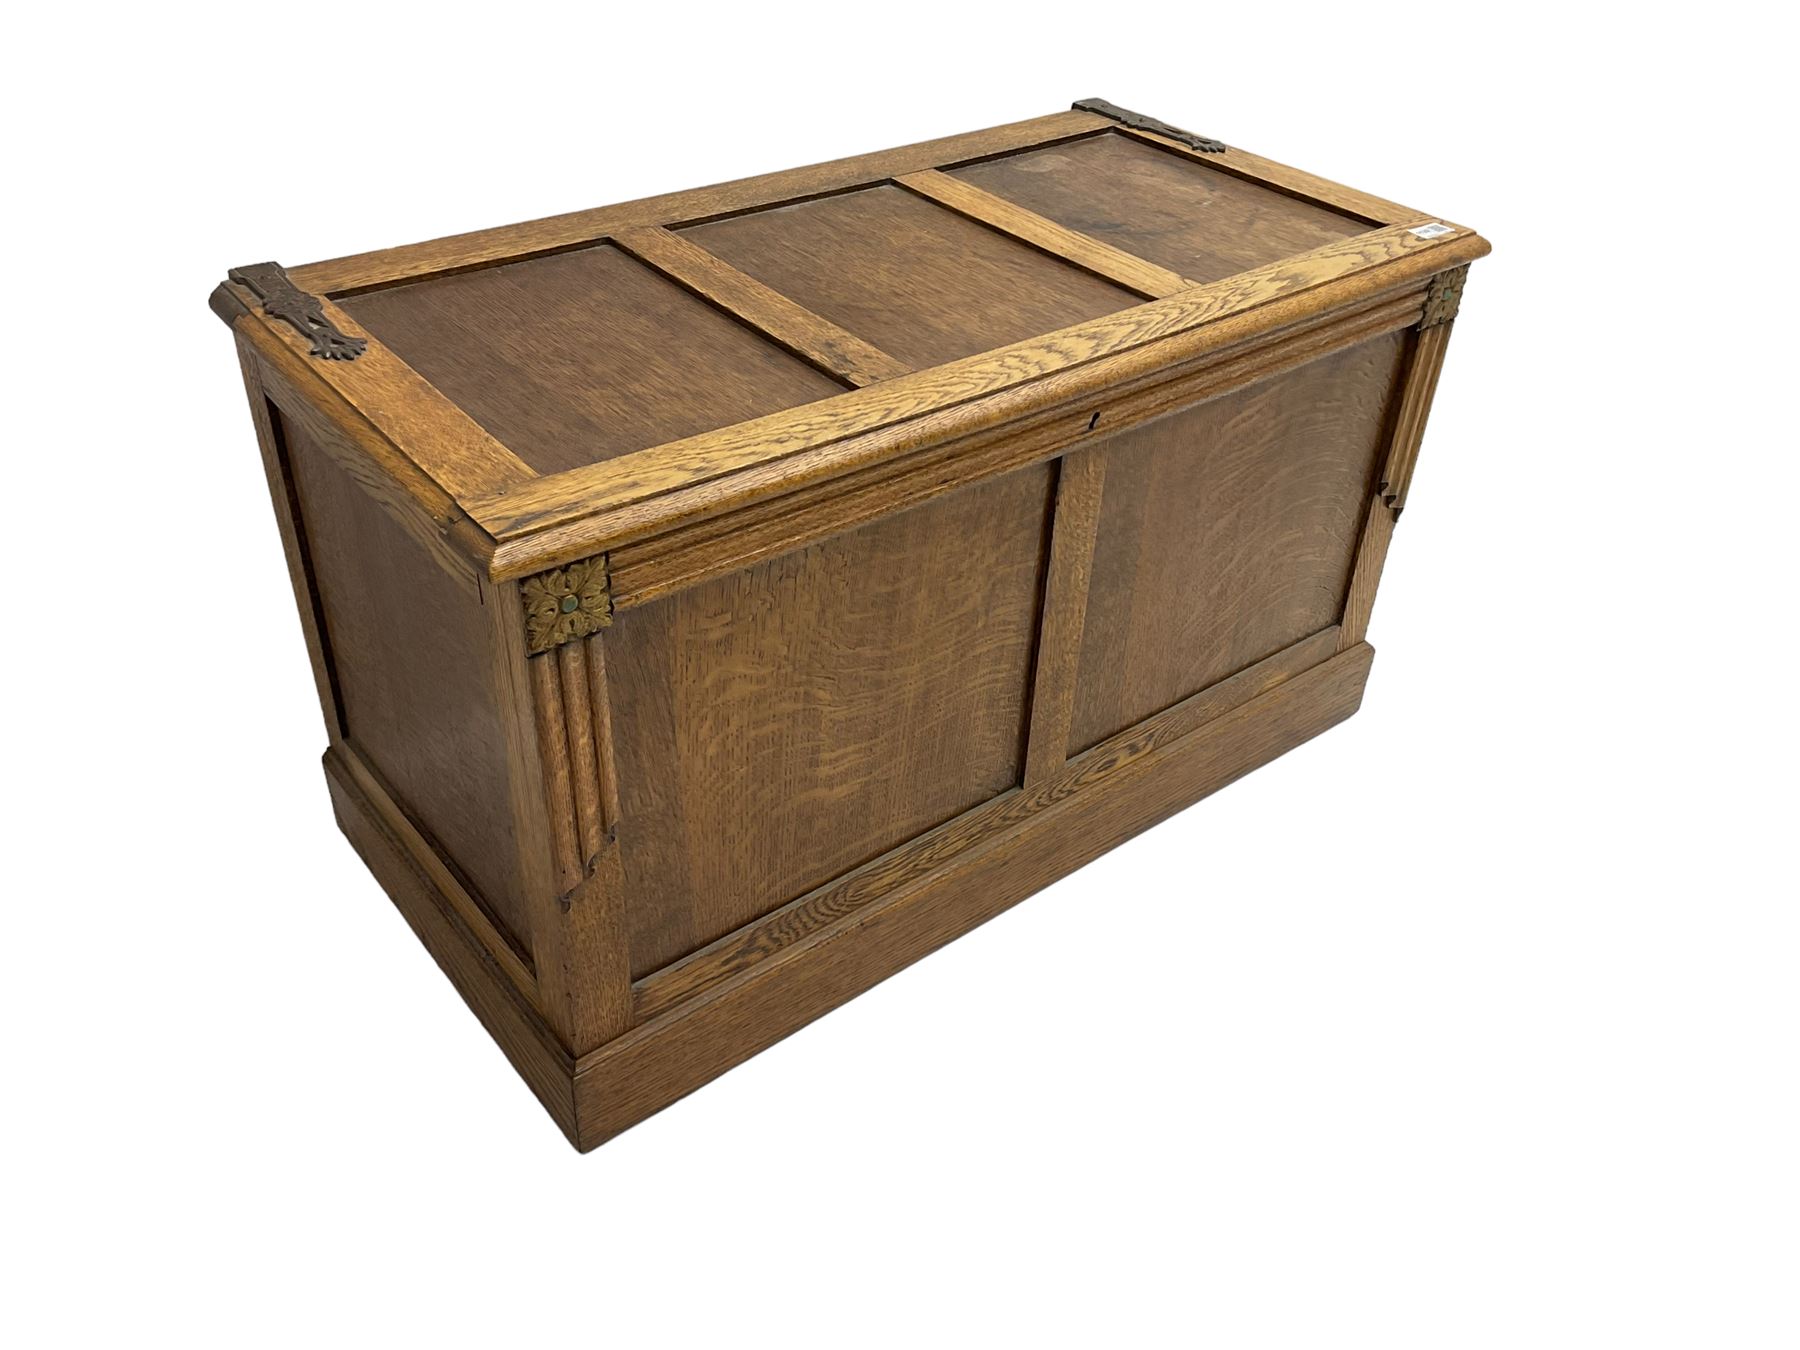 Arts and Crafts oak panelled chest or coffer - Image 4 of 7